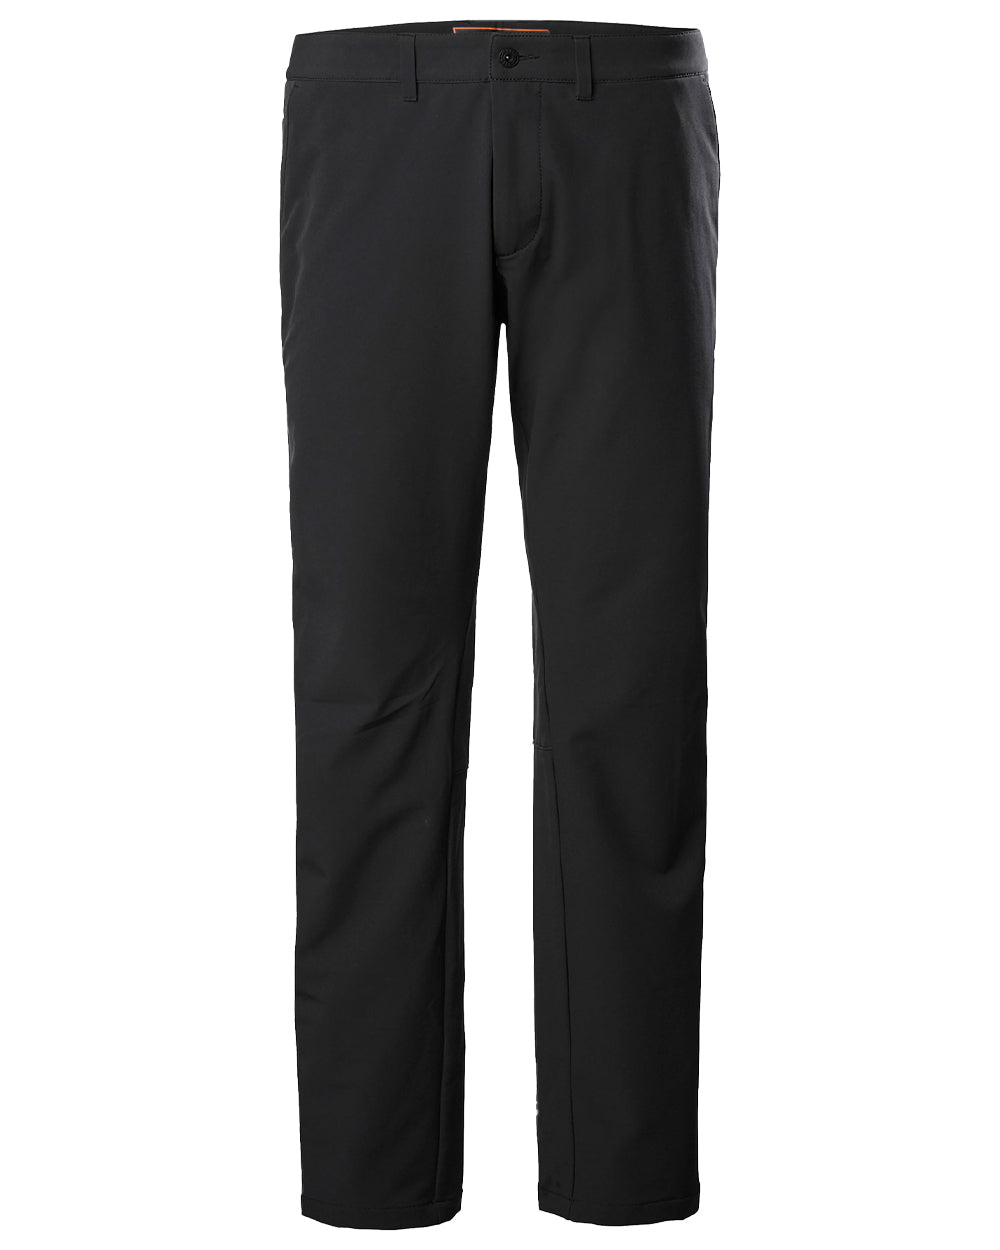 Carbon coloured Musto x Land Rover Tech Stretch Trousers on White background